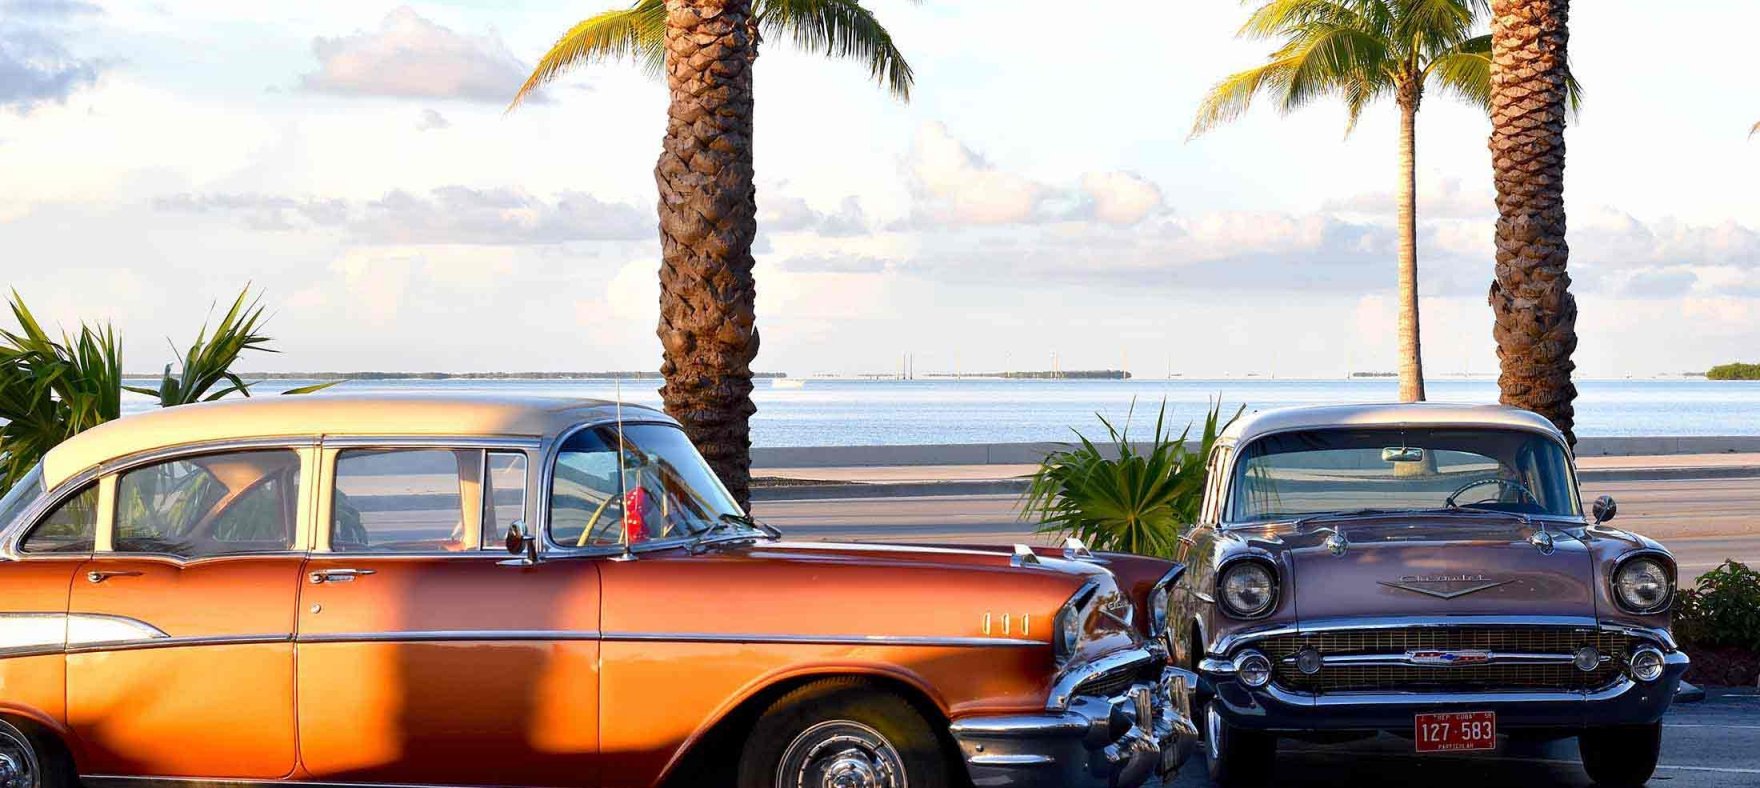 Parked classic cars with the beach and palm trees in the background